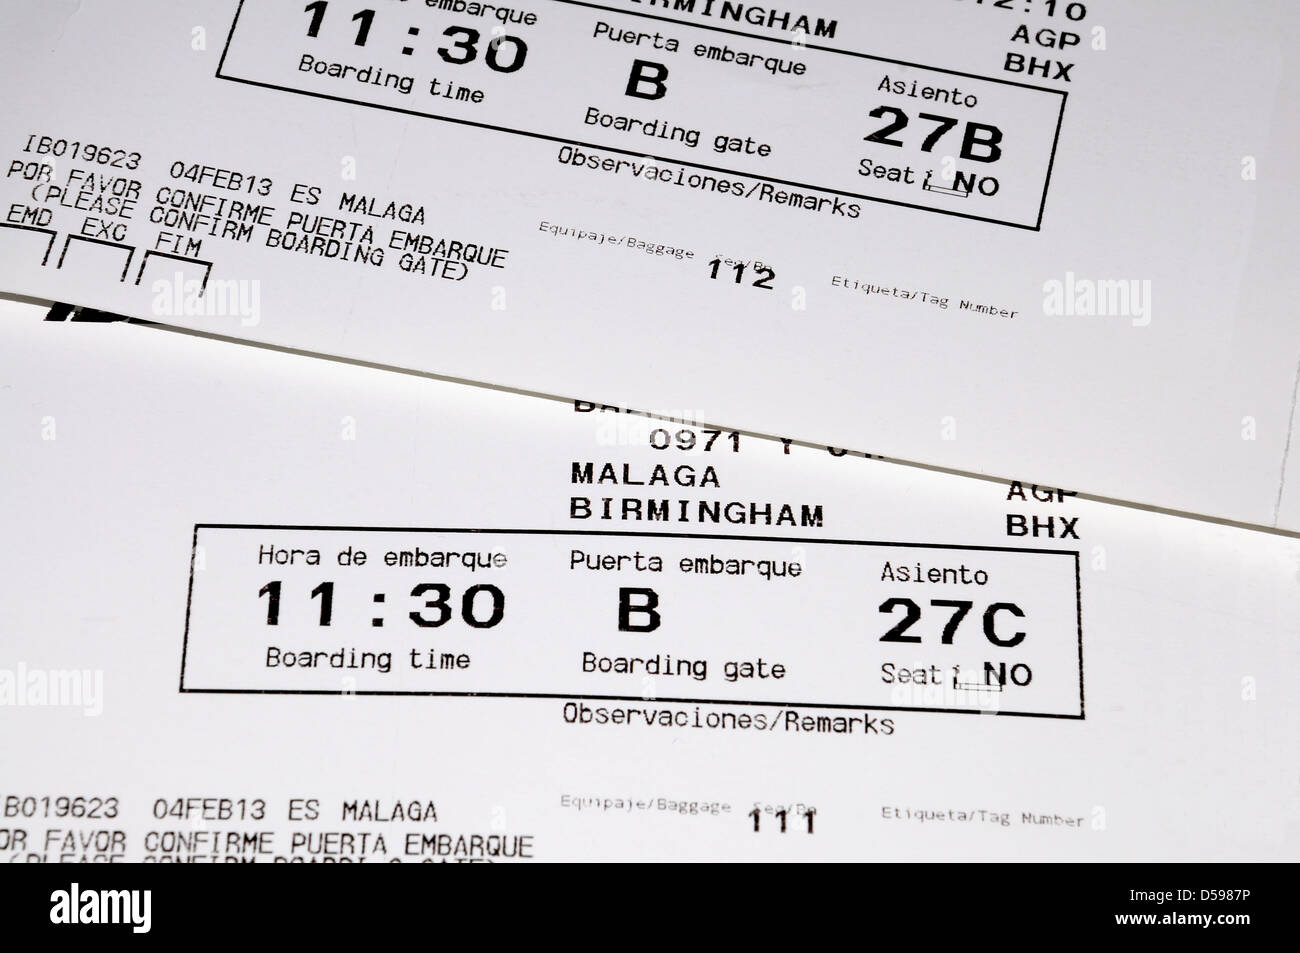 Two Spanish aircraft boarding passes. Stock Photo